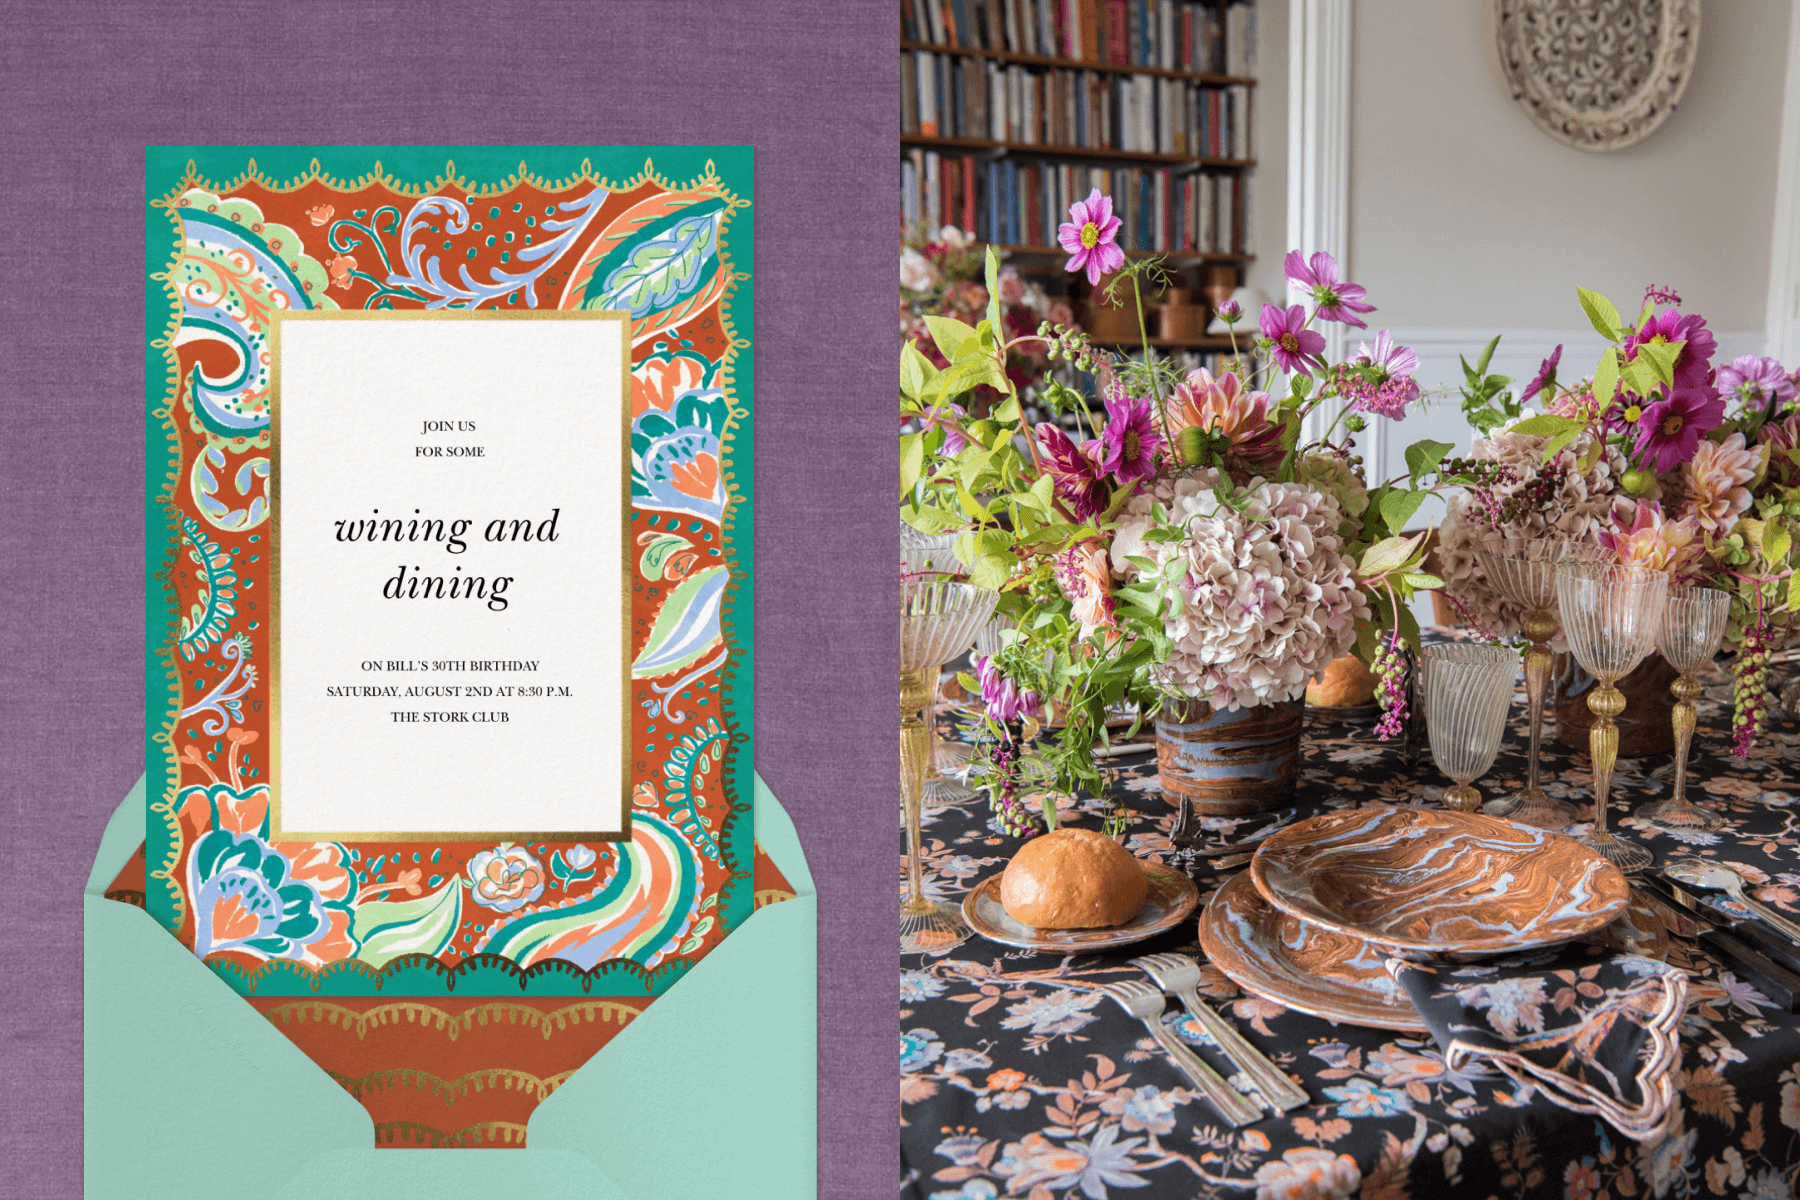 Left: Dinner party invitation featuring a brown and blue paisley border, coming out of a light turquoise envelope. Right: Dinner table set with a black floral tablecloth, marbled plates, and a purple flower arrangement. 